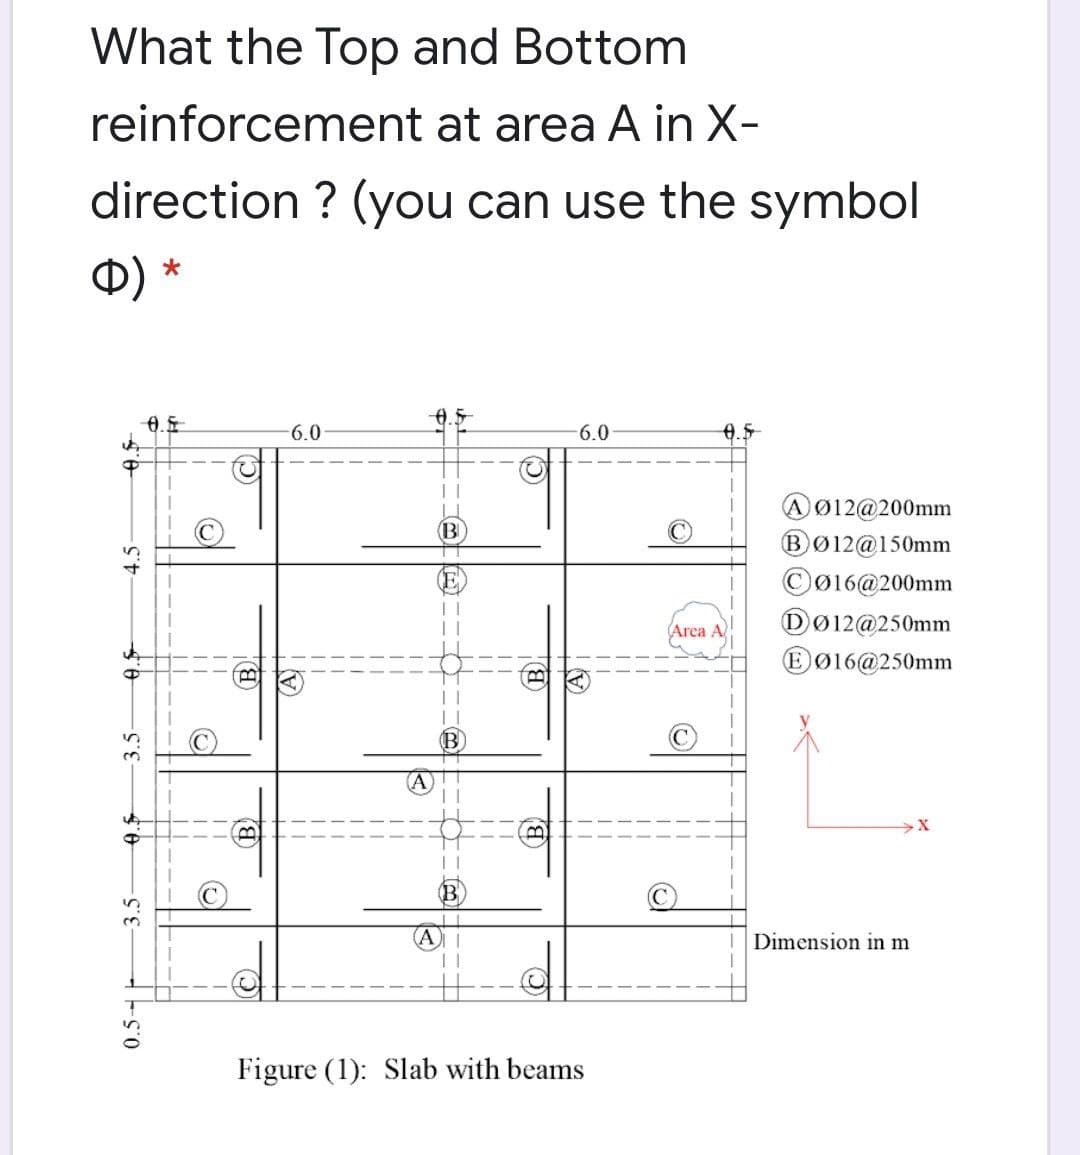 What the Top and Bottom
reinforcement at area A in X-
direction ? (you can use the symbol
Ф)
*
6.0-
-6.0
Aø12@200mm
B
BØ12@150mm
CØ16@200mm
Area A
Dø12@250mm
EØ16@250mm
A
Dimension in m
Figure (1): Slab with beams
0.5-
3.5
3.5
4.5
(B)
